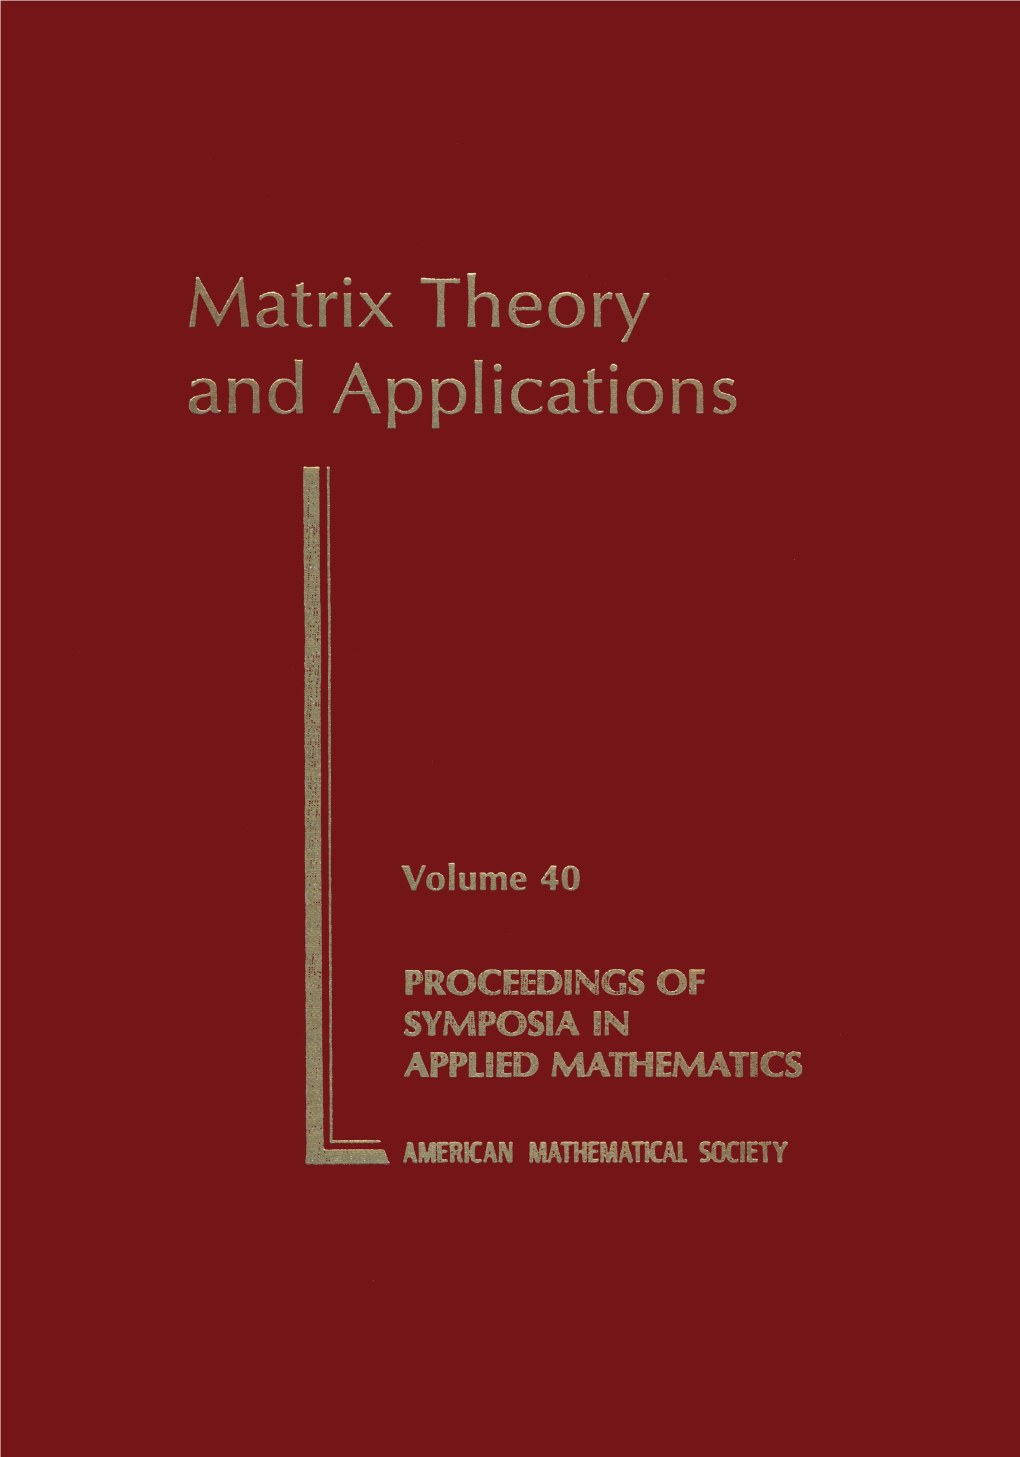 MATRIX THEORY and APPLICATIONS Edited by Charles R